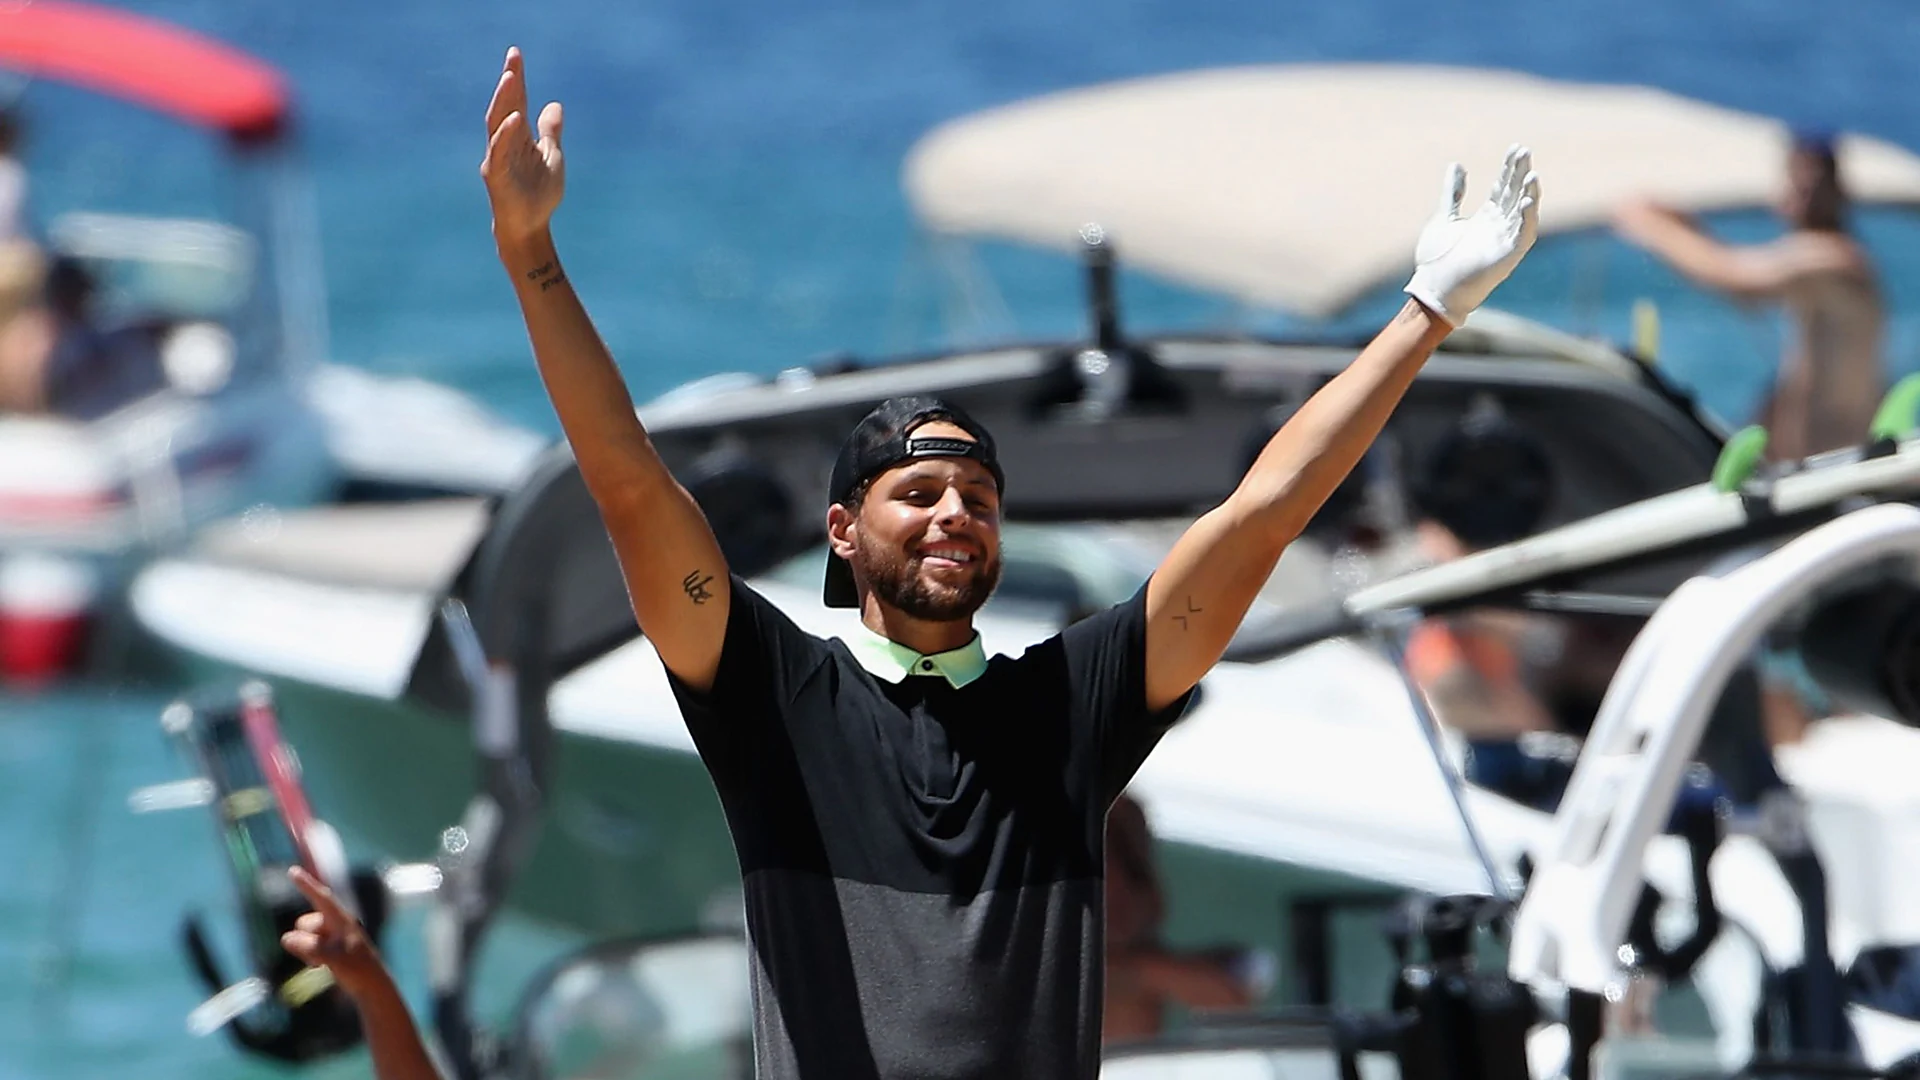 Report: Stage set for Steph Curry-hosted PGA Tour event in fall 2021